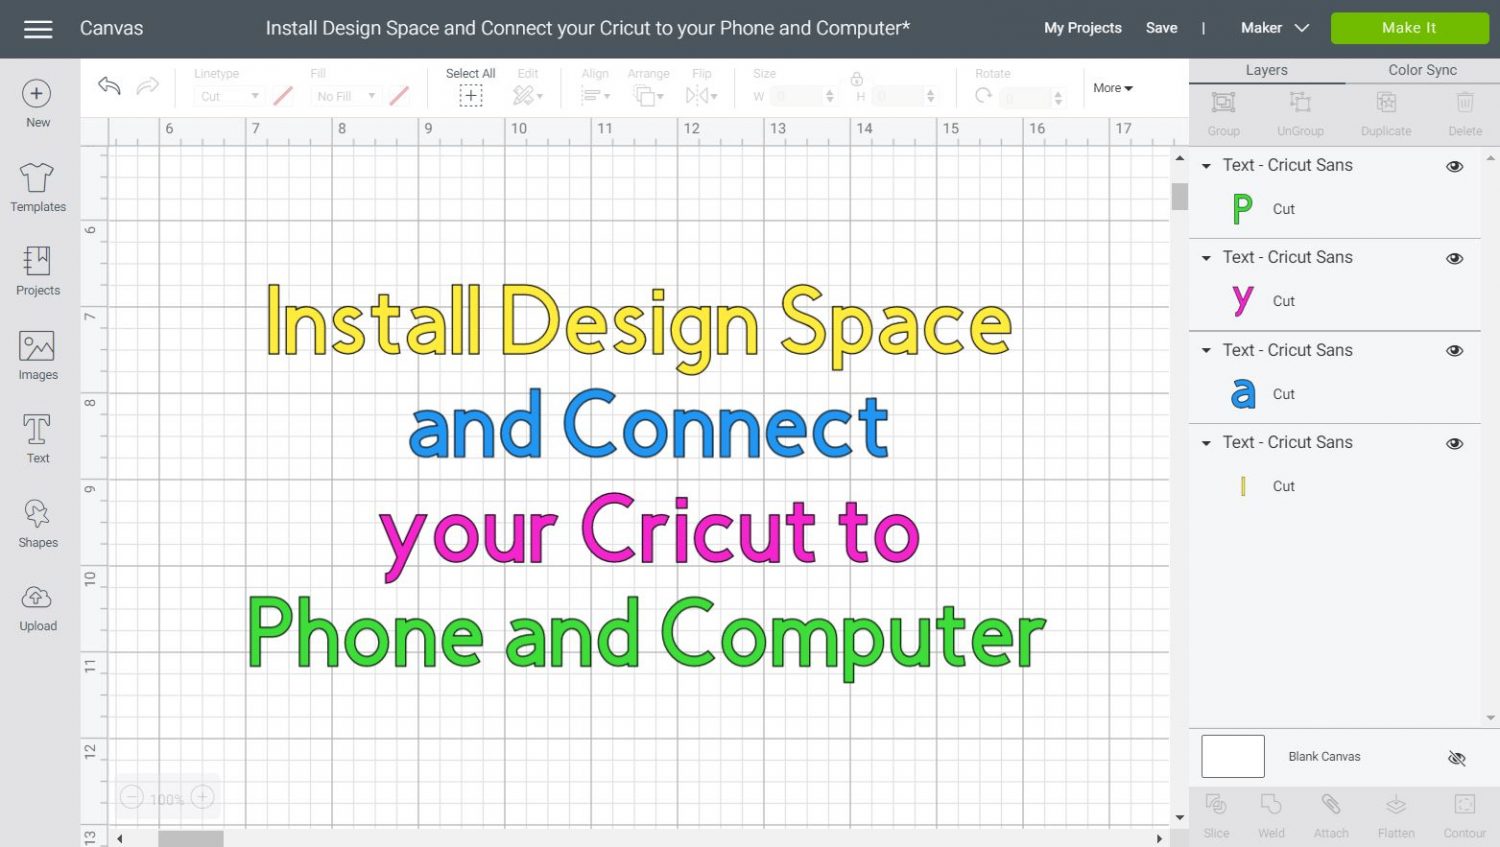 Install Design Space and Connect your Cricut to your Phone and Computer